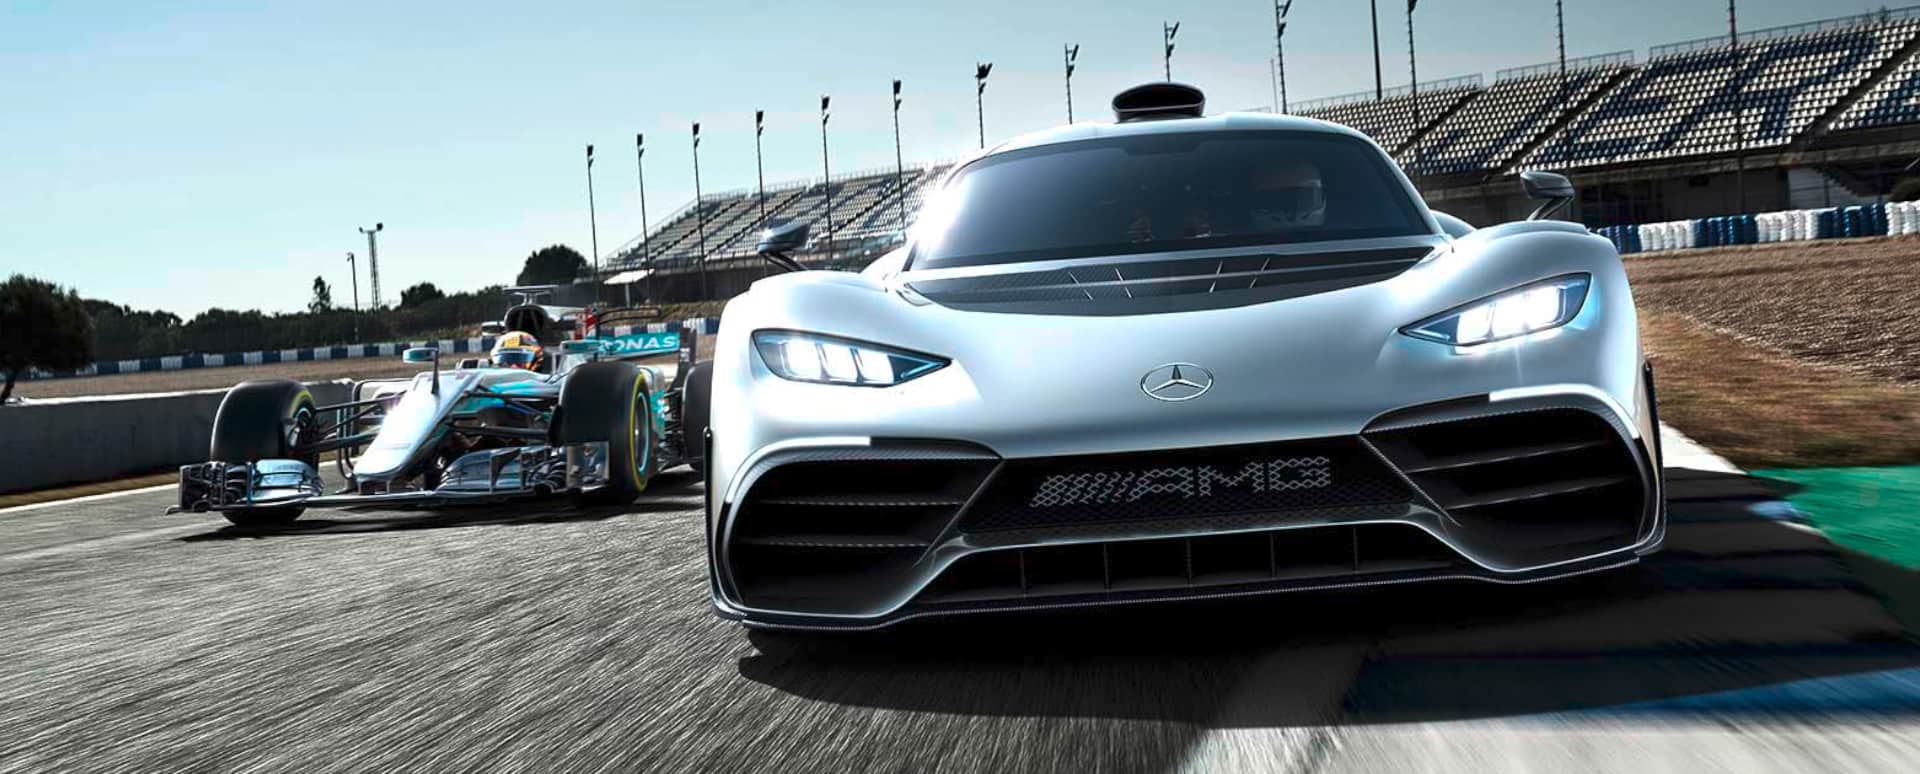 Mercedes-AMG Project One F1 Car